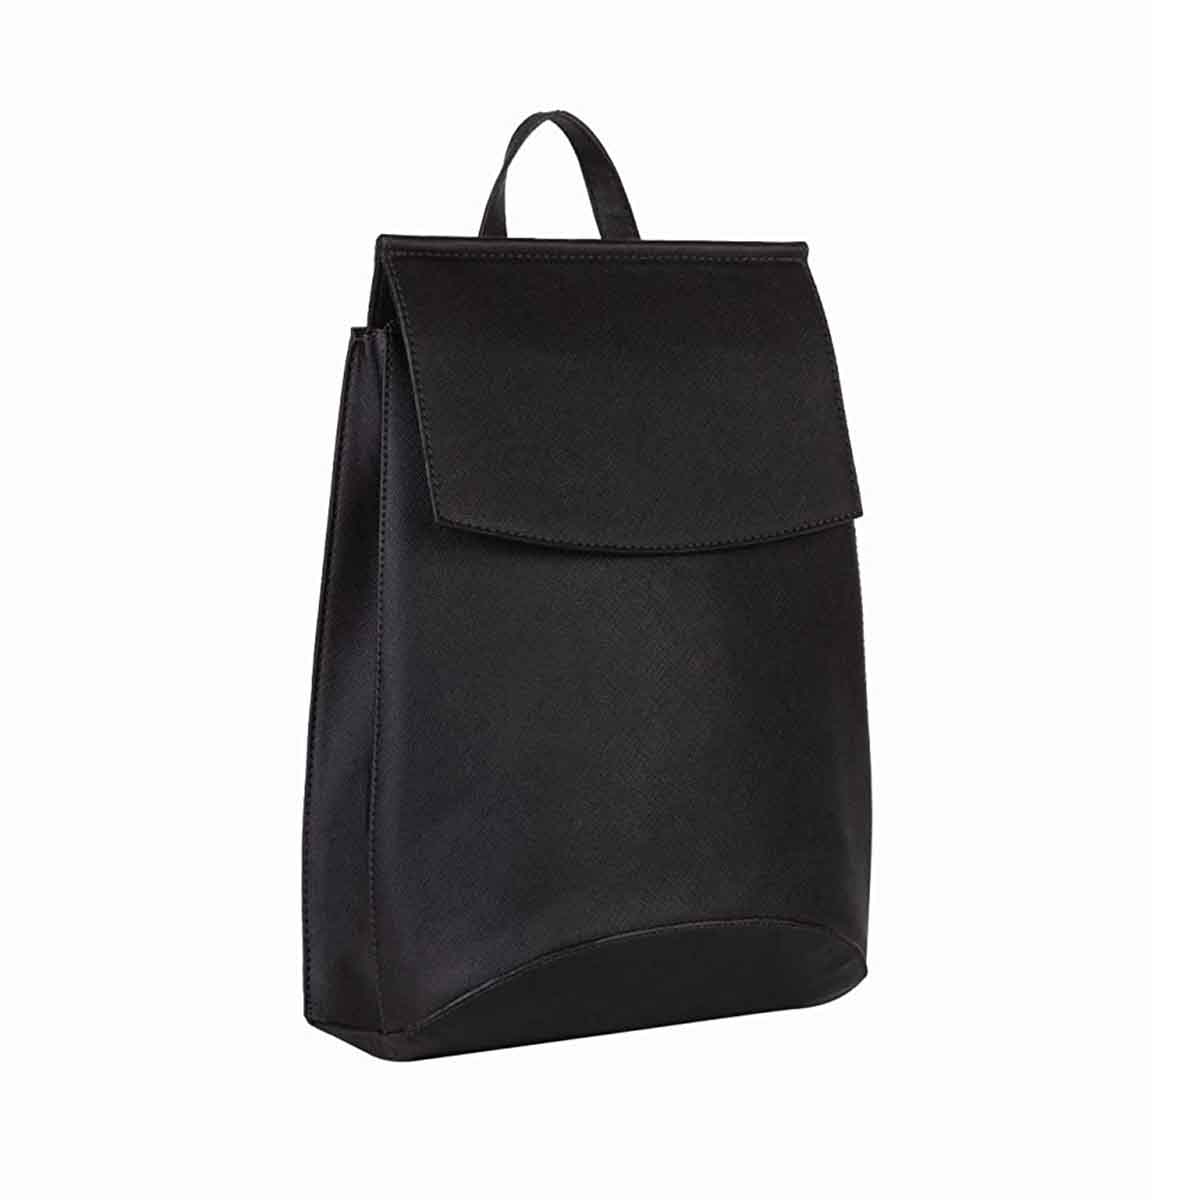 Mona-B Bag Mona B Convertible Backpack for Offices Schools and Colleges with Stylish Design for Women (Black)